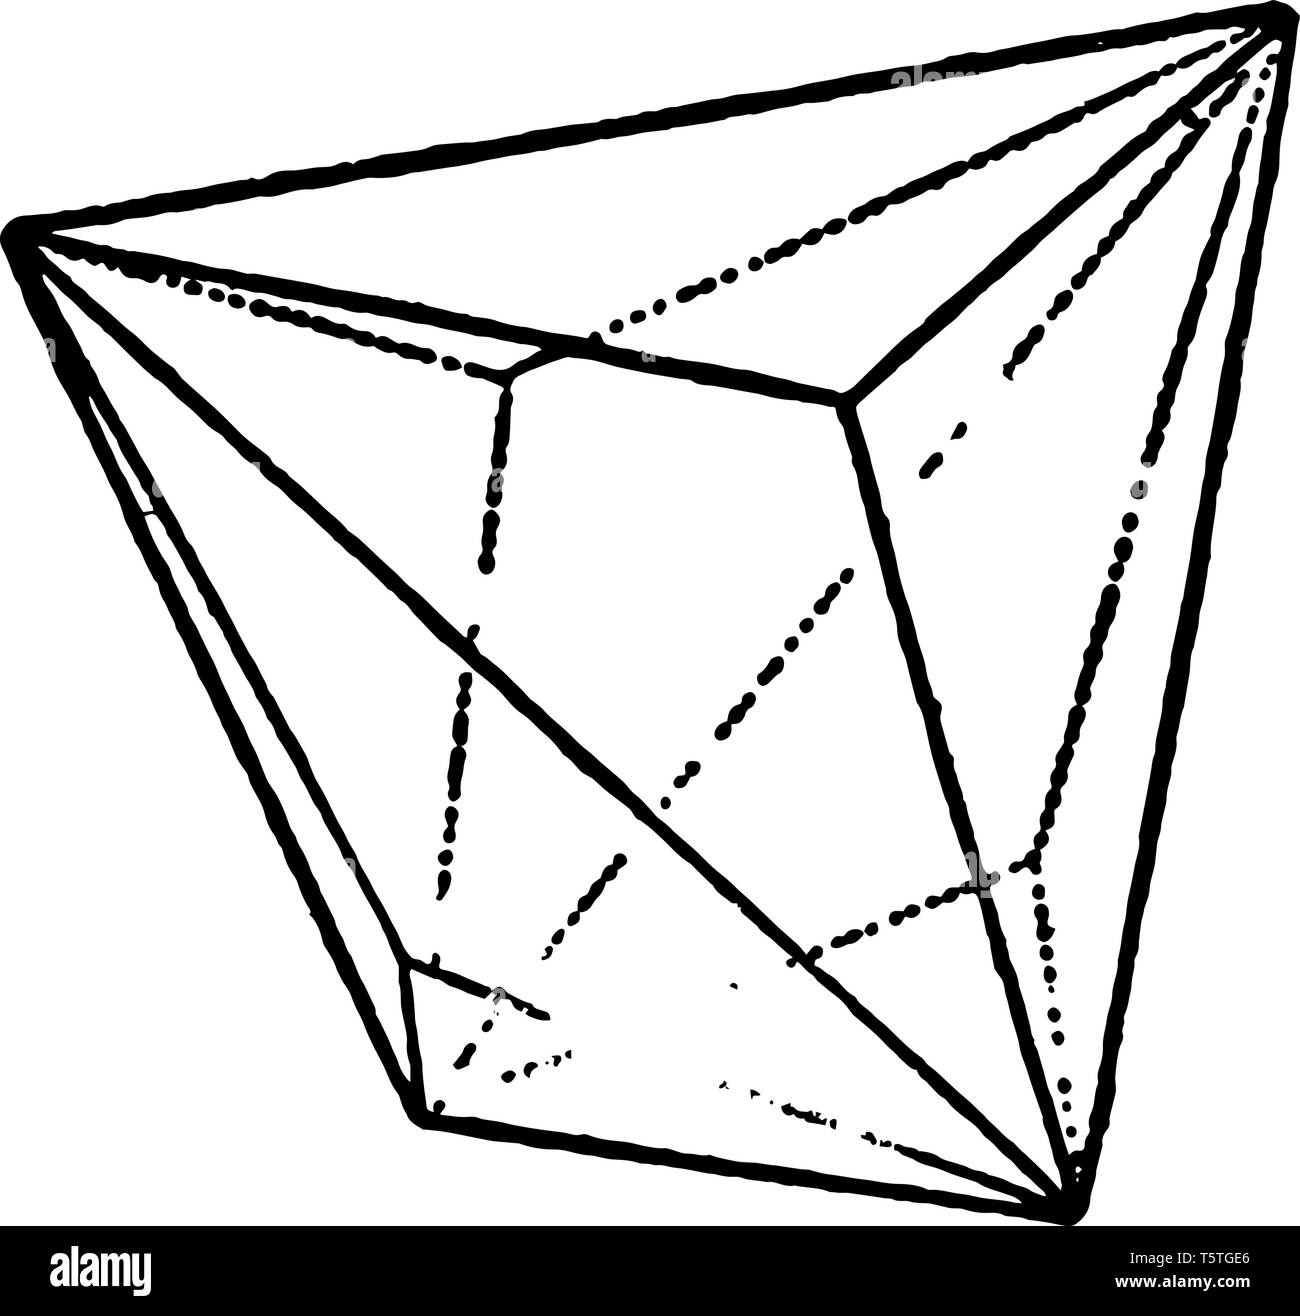 A diagram of Triakis - tetrahedron. It is delimited by twelve isosceles triangles arranged of three on the faces of the tetrahedron, vintage line draw Stock Vector